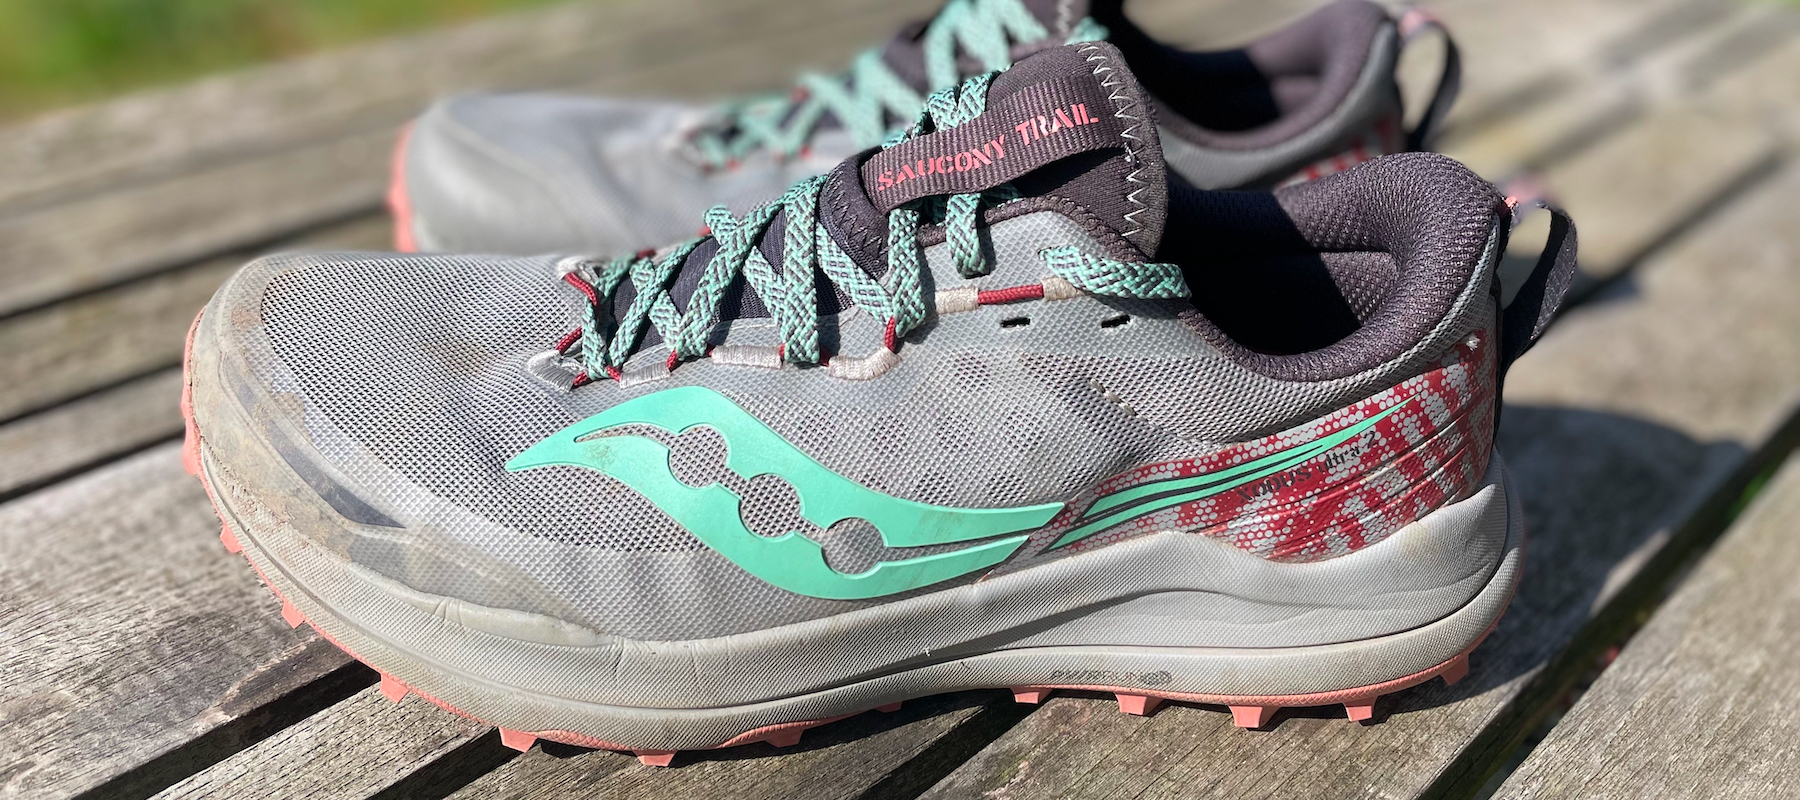 Saucony Xodus Ultra 2 trail running shoes review | Advnture